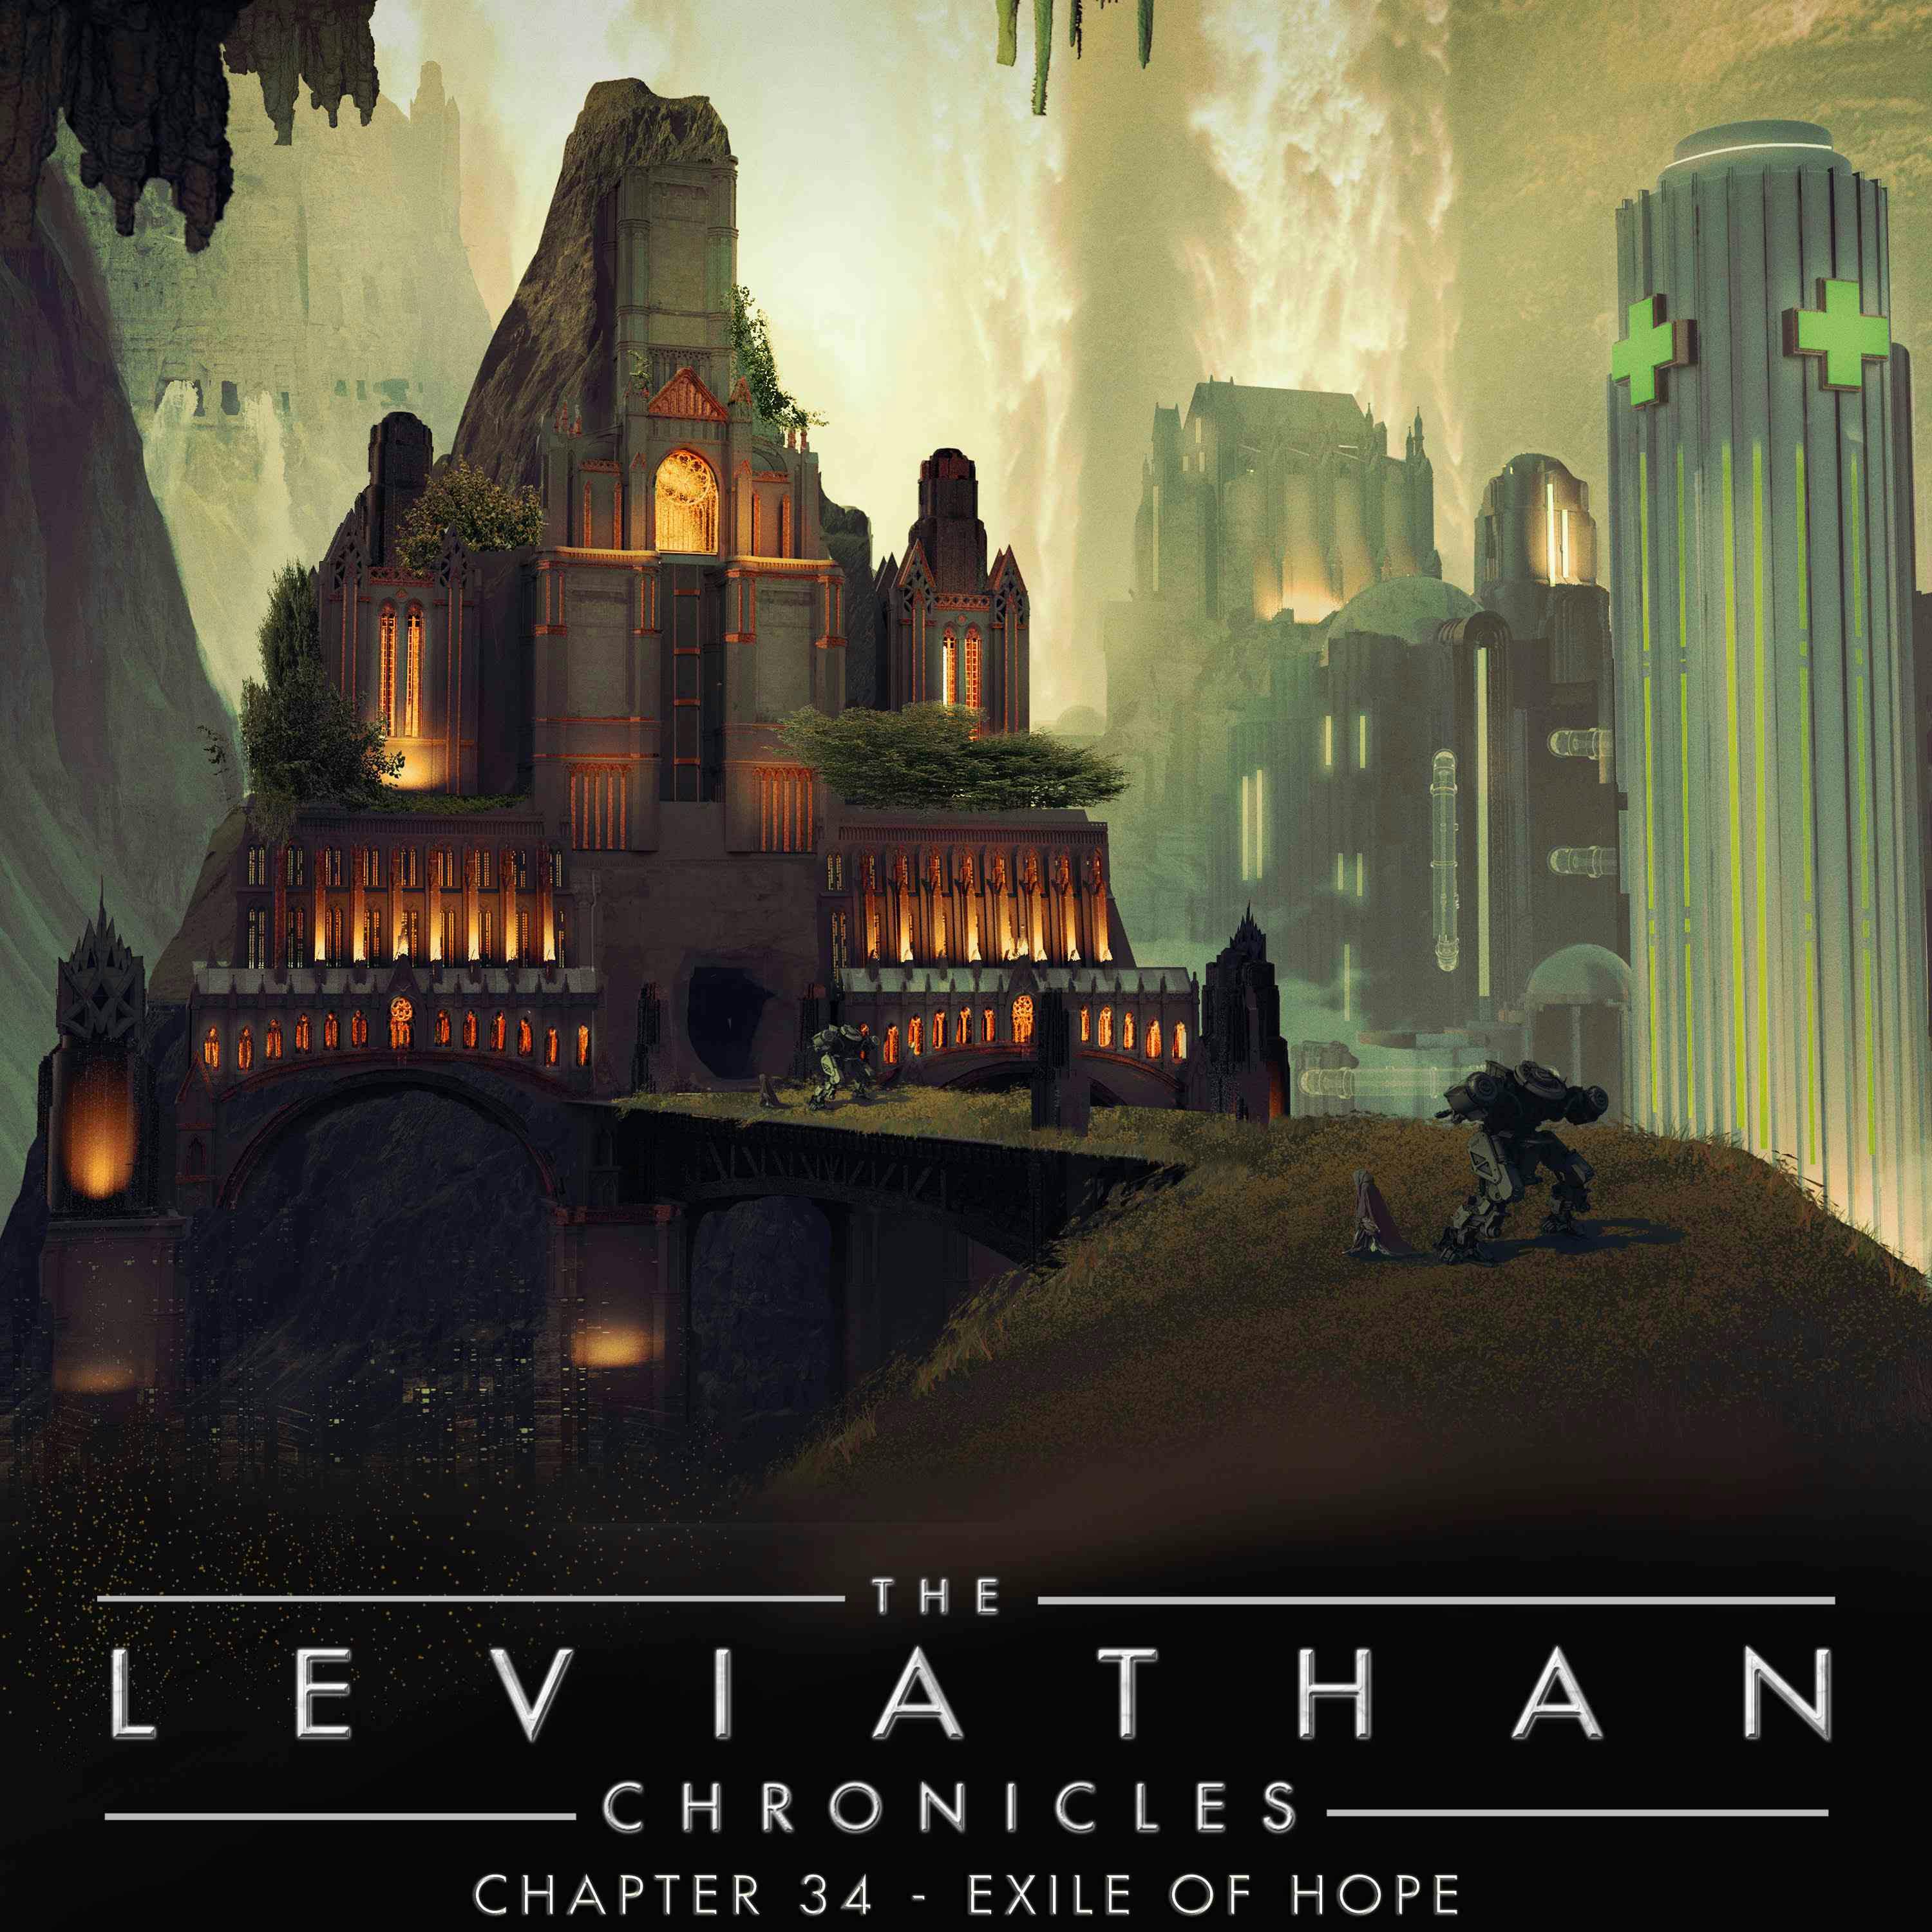 The Leviathan Chronicles | Chapter 34 - Exile of Hope